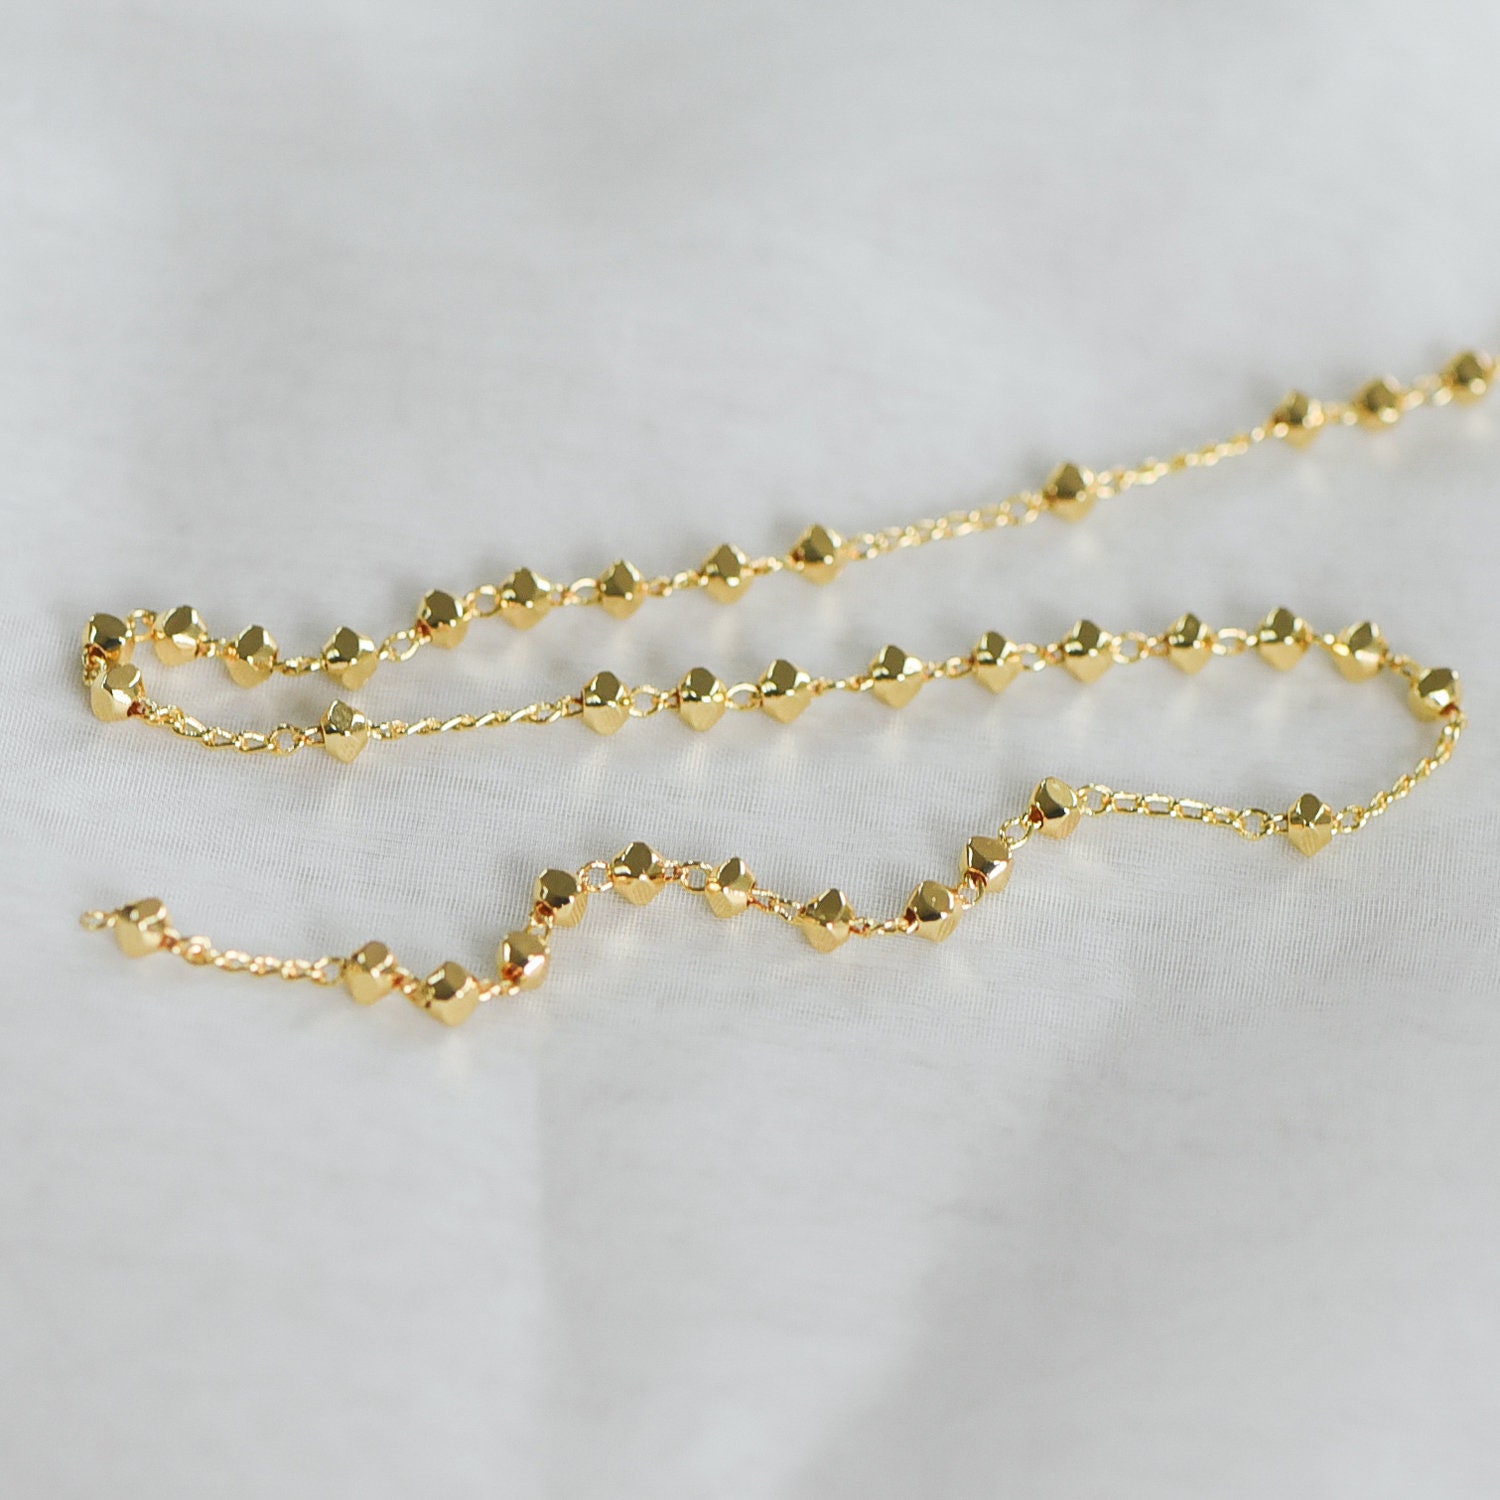 Gold Plated Brass Beaded Chains, 1.5mm Chain With 3mm Faceted Beads,  Jewelry Craft Chain Wholesale LK-193/ 1 Meter3.3 Ft 